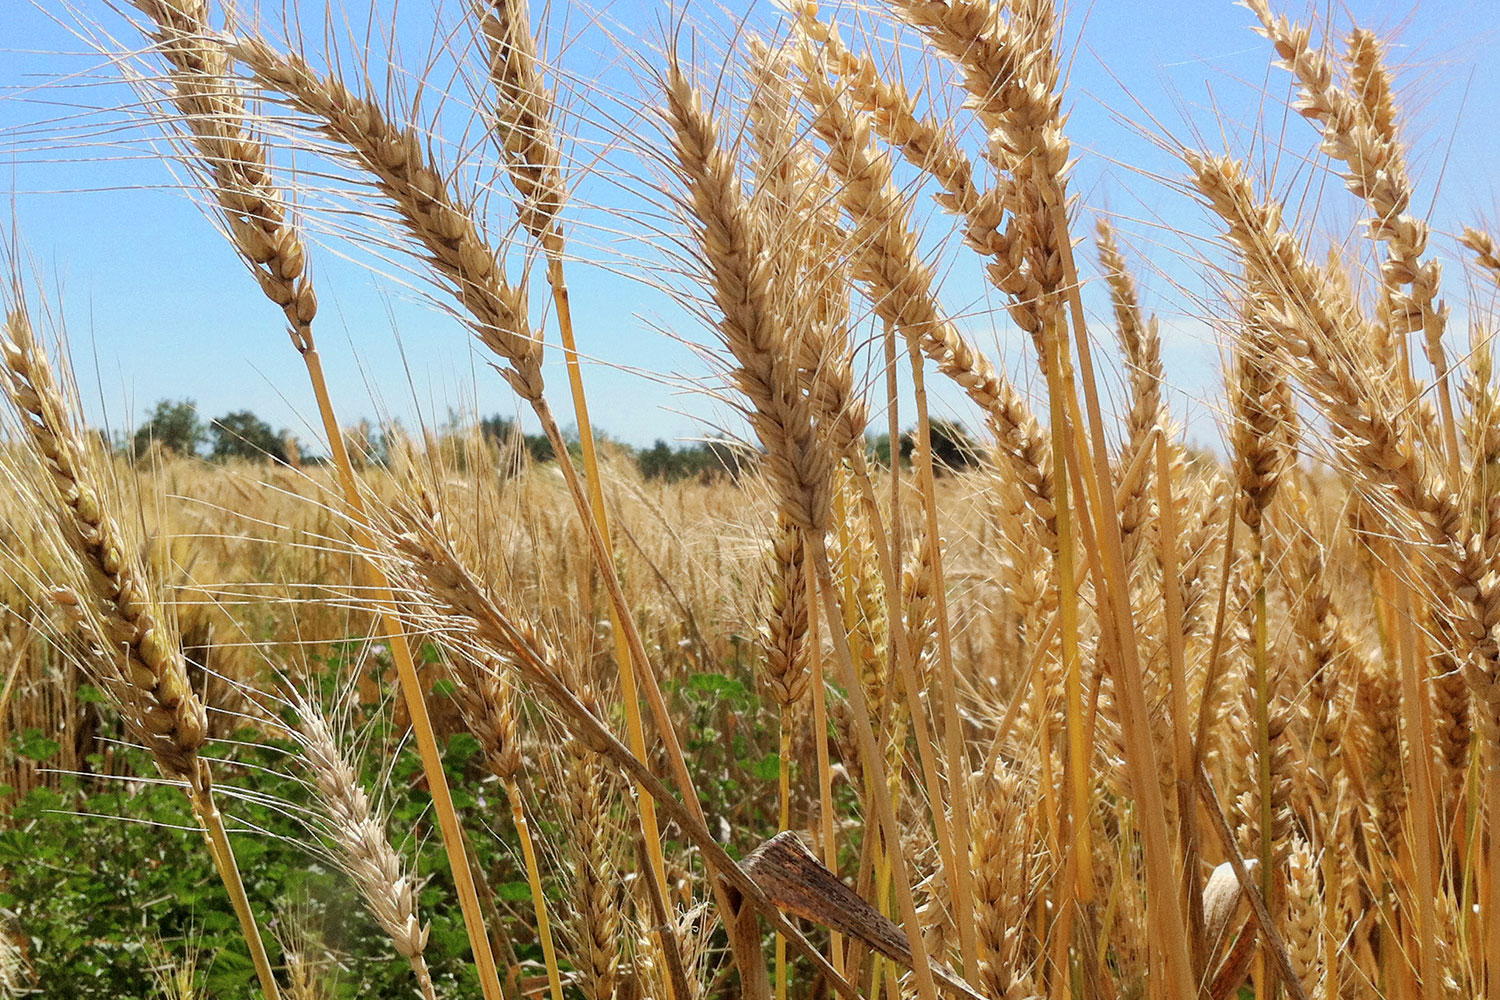 The wheat fields of Capay Mills